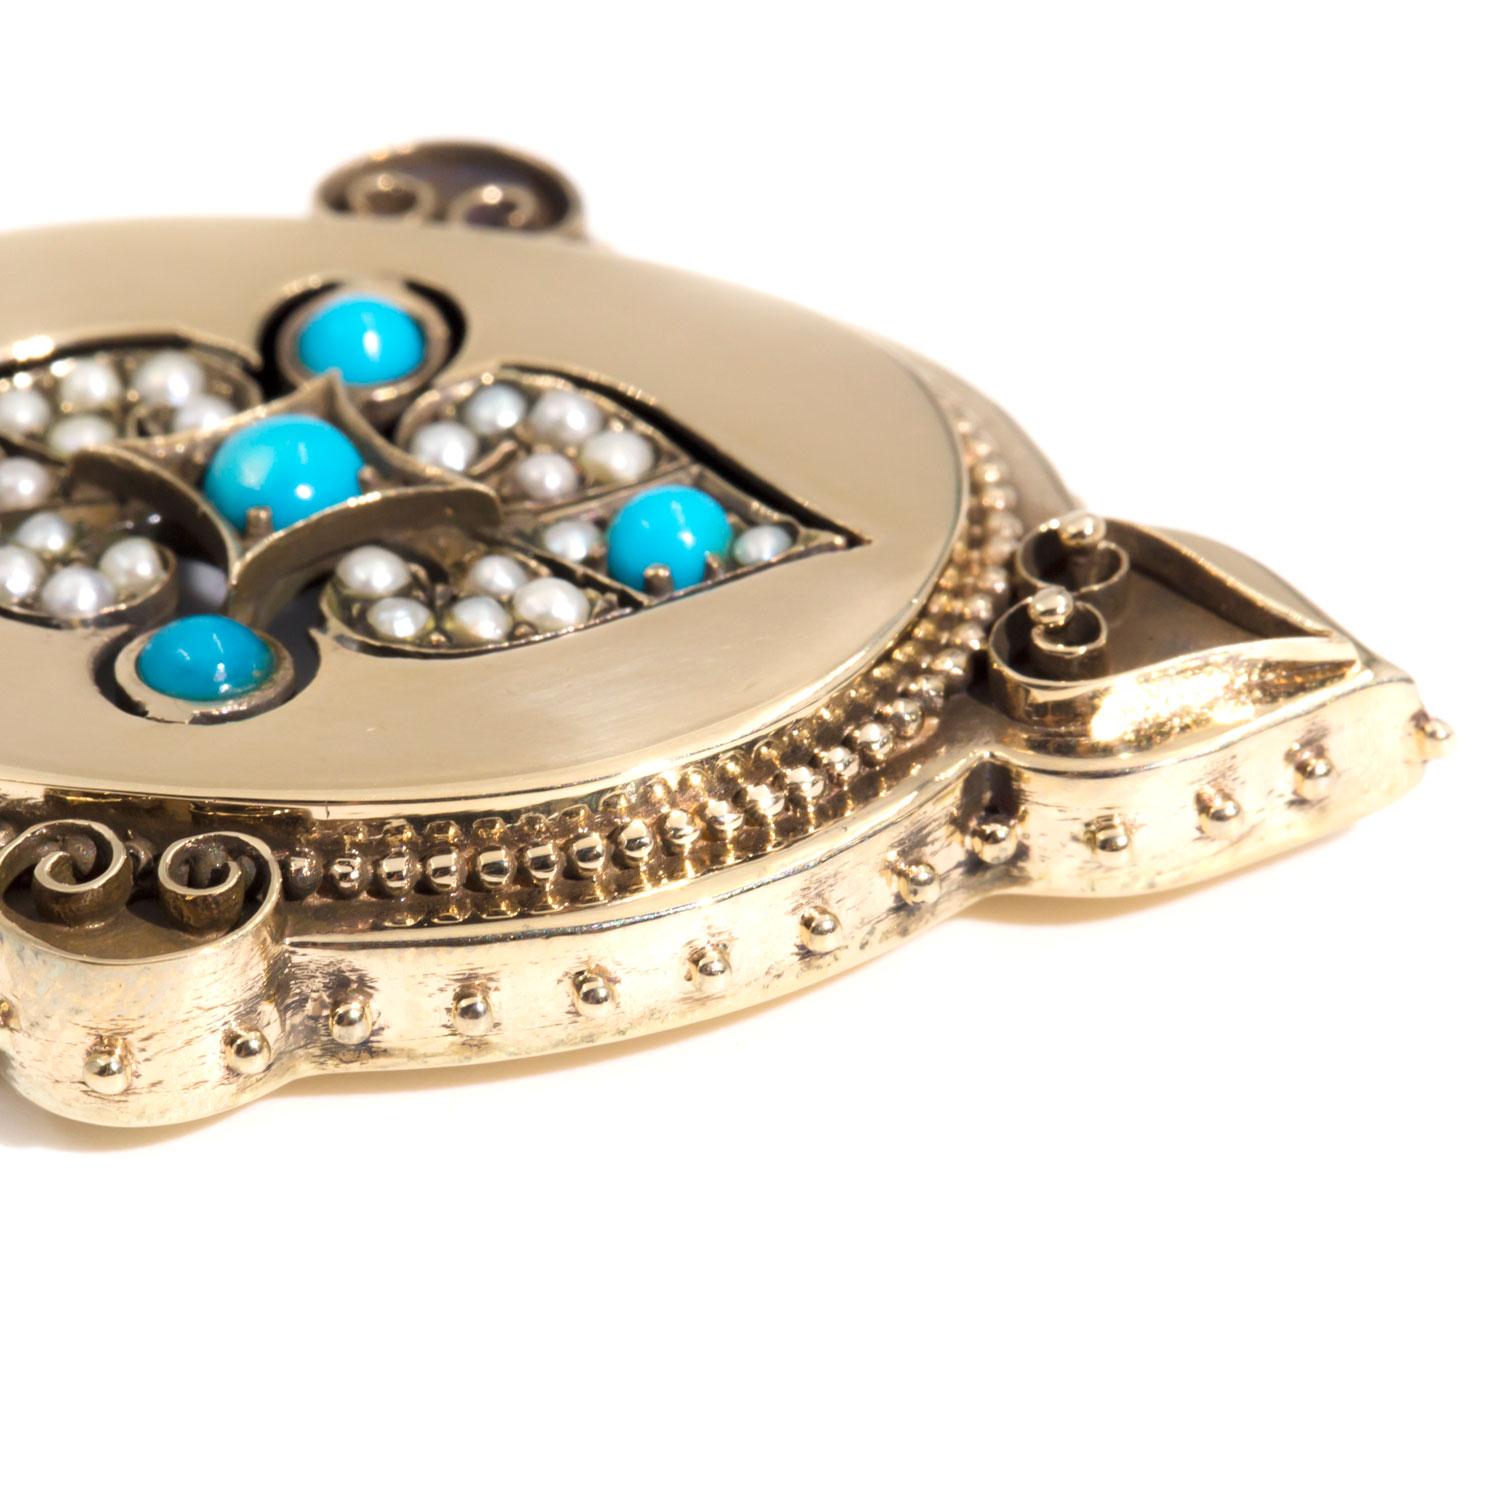 Carefully crafted in 9 carat yellow gold is this gorgeous vintage pendant featuring five round cabochon turquoise gems, further embellished with seed pearls, all carefully placed in an intricate pattern. She has a beautifully beaded border with